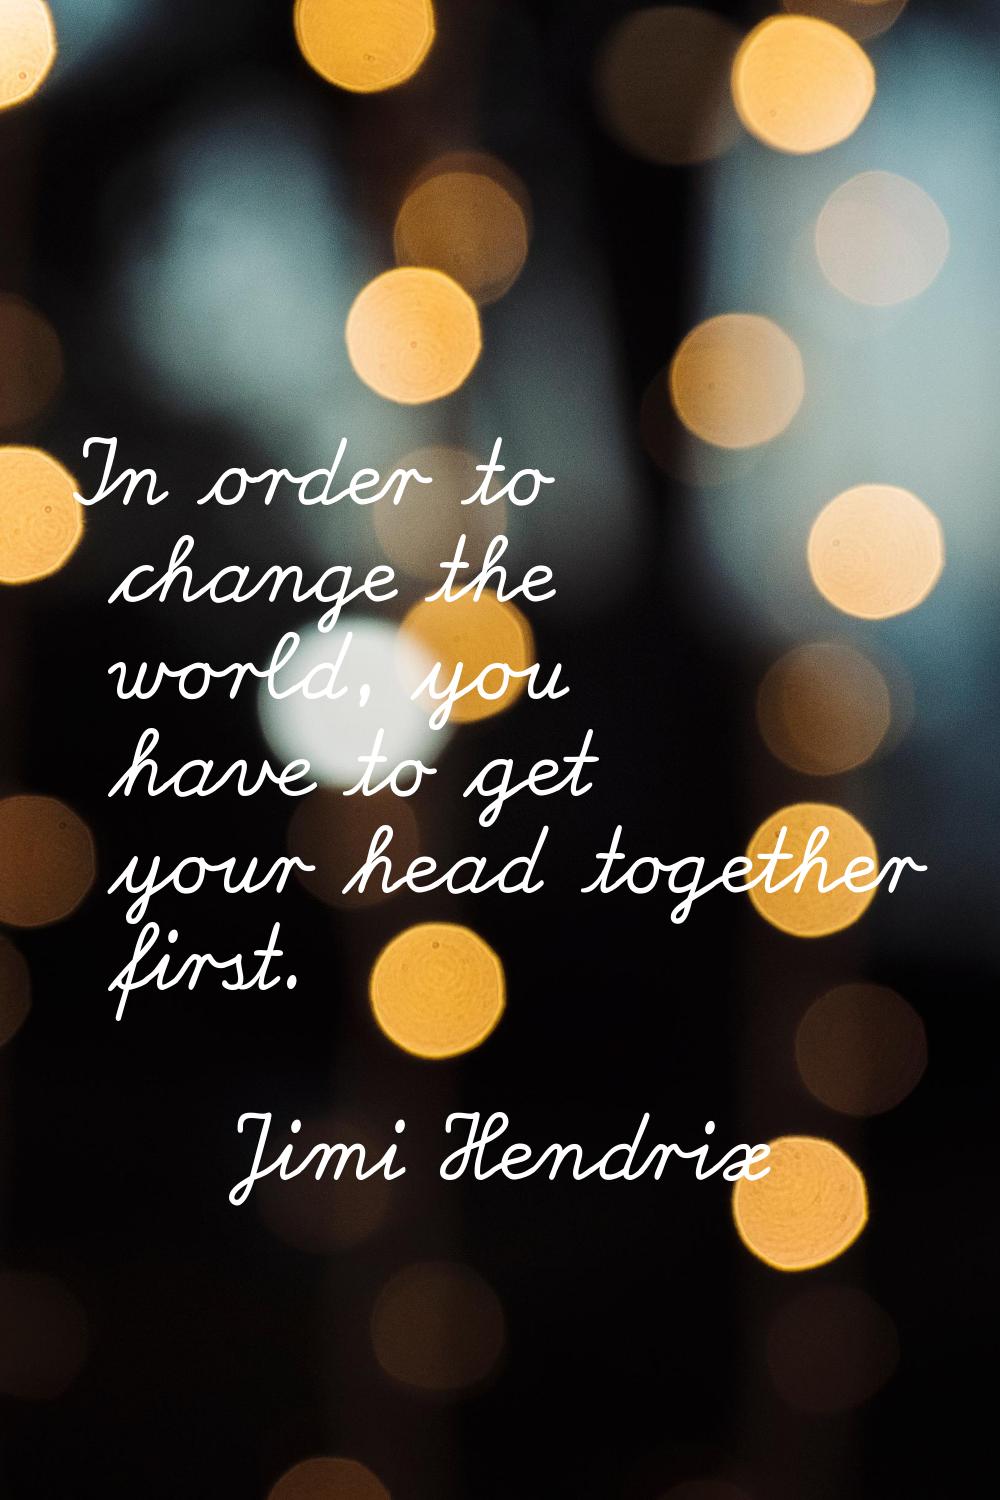 In order to change the world, you have to get your head together first.